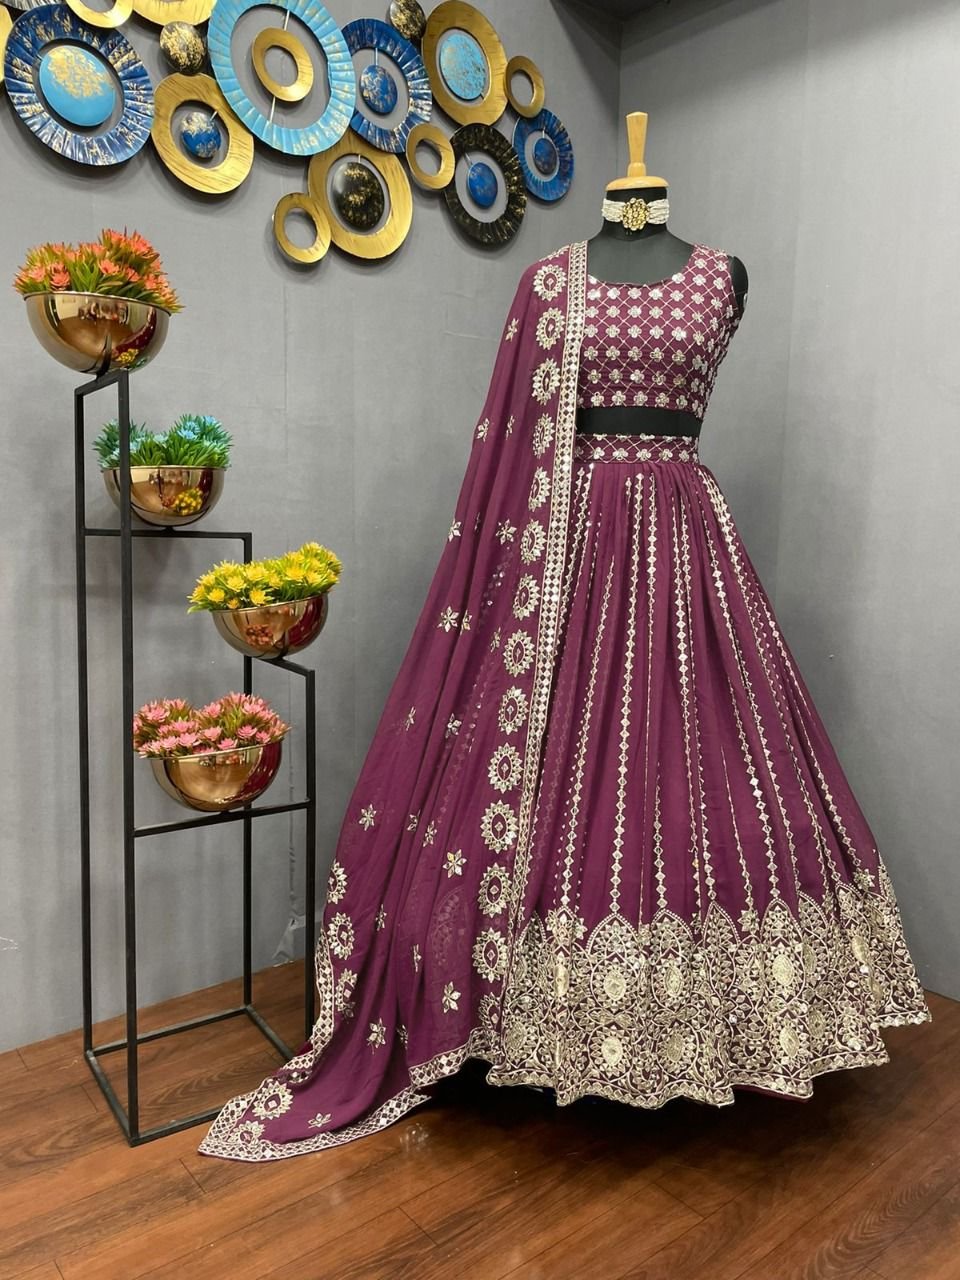 The reception lehenga for bride is styled with a full-sleeve blouse